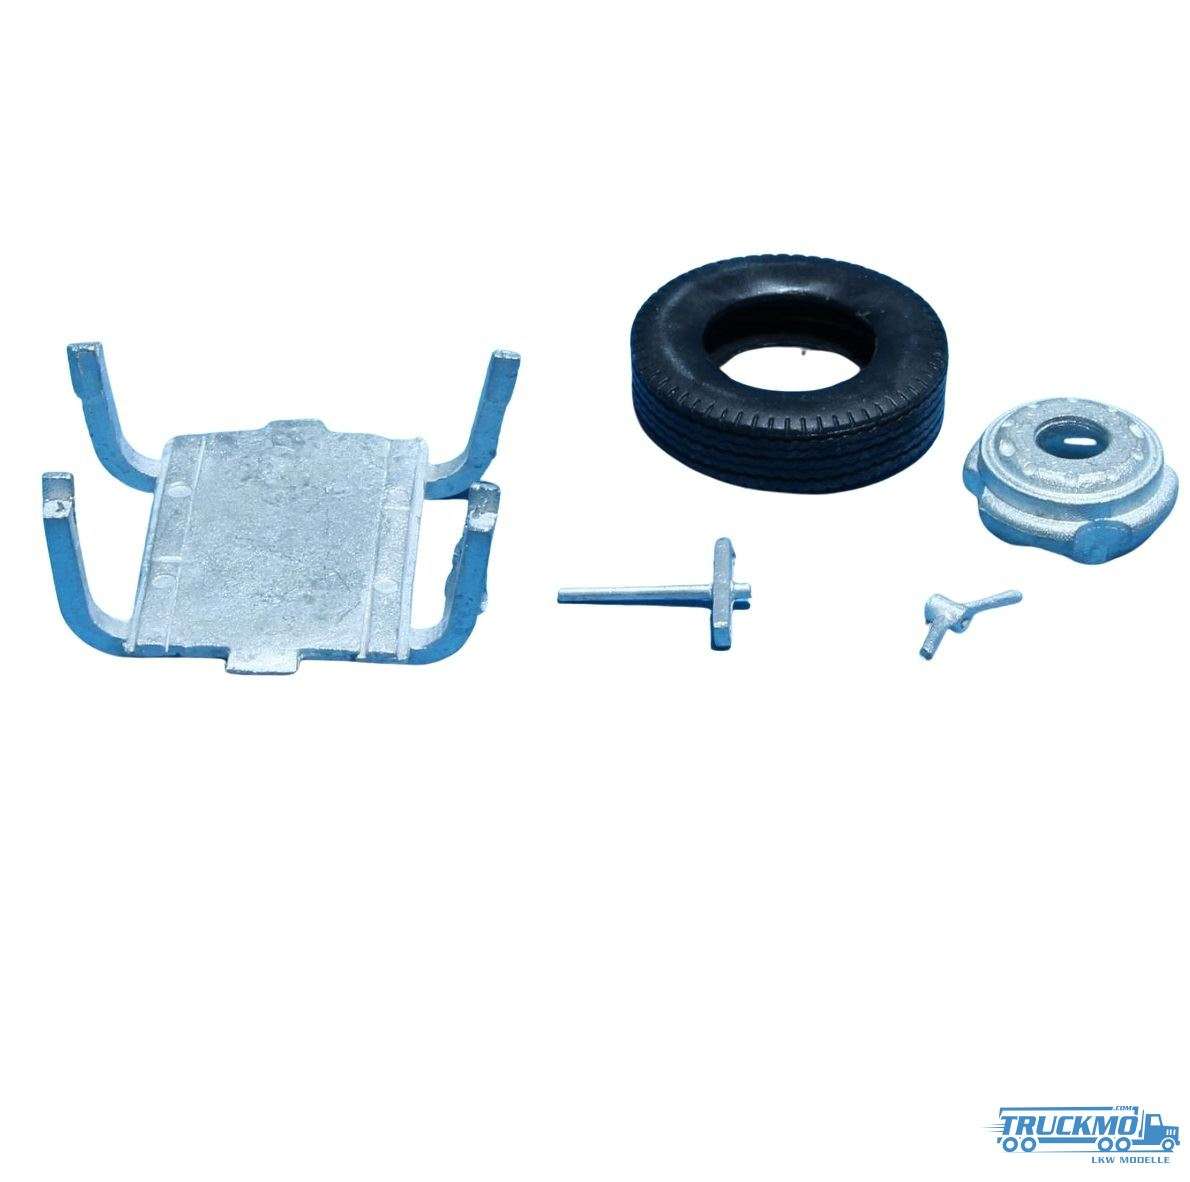 Tekno Parts spare wheel carrier including tire and rim connection 101-012 77275